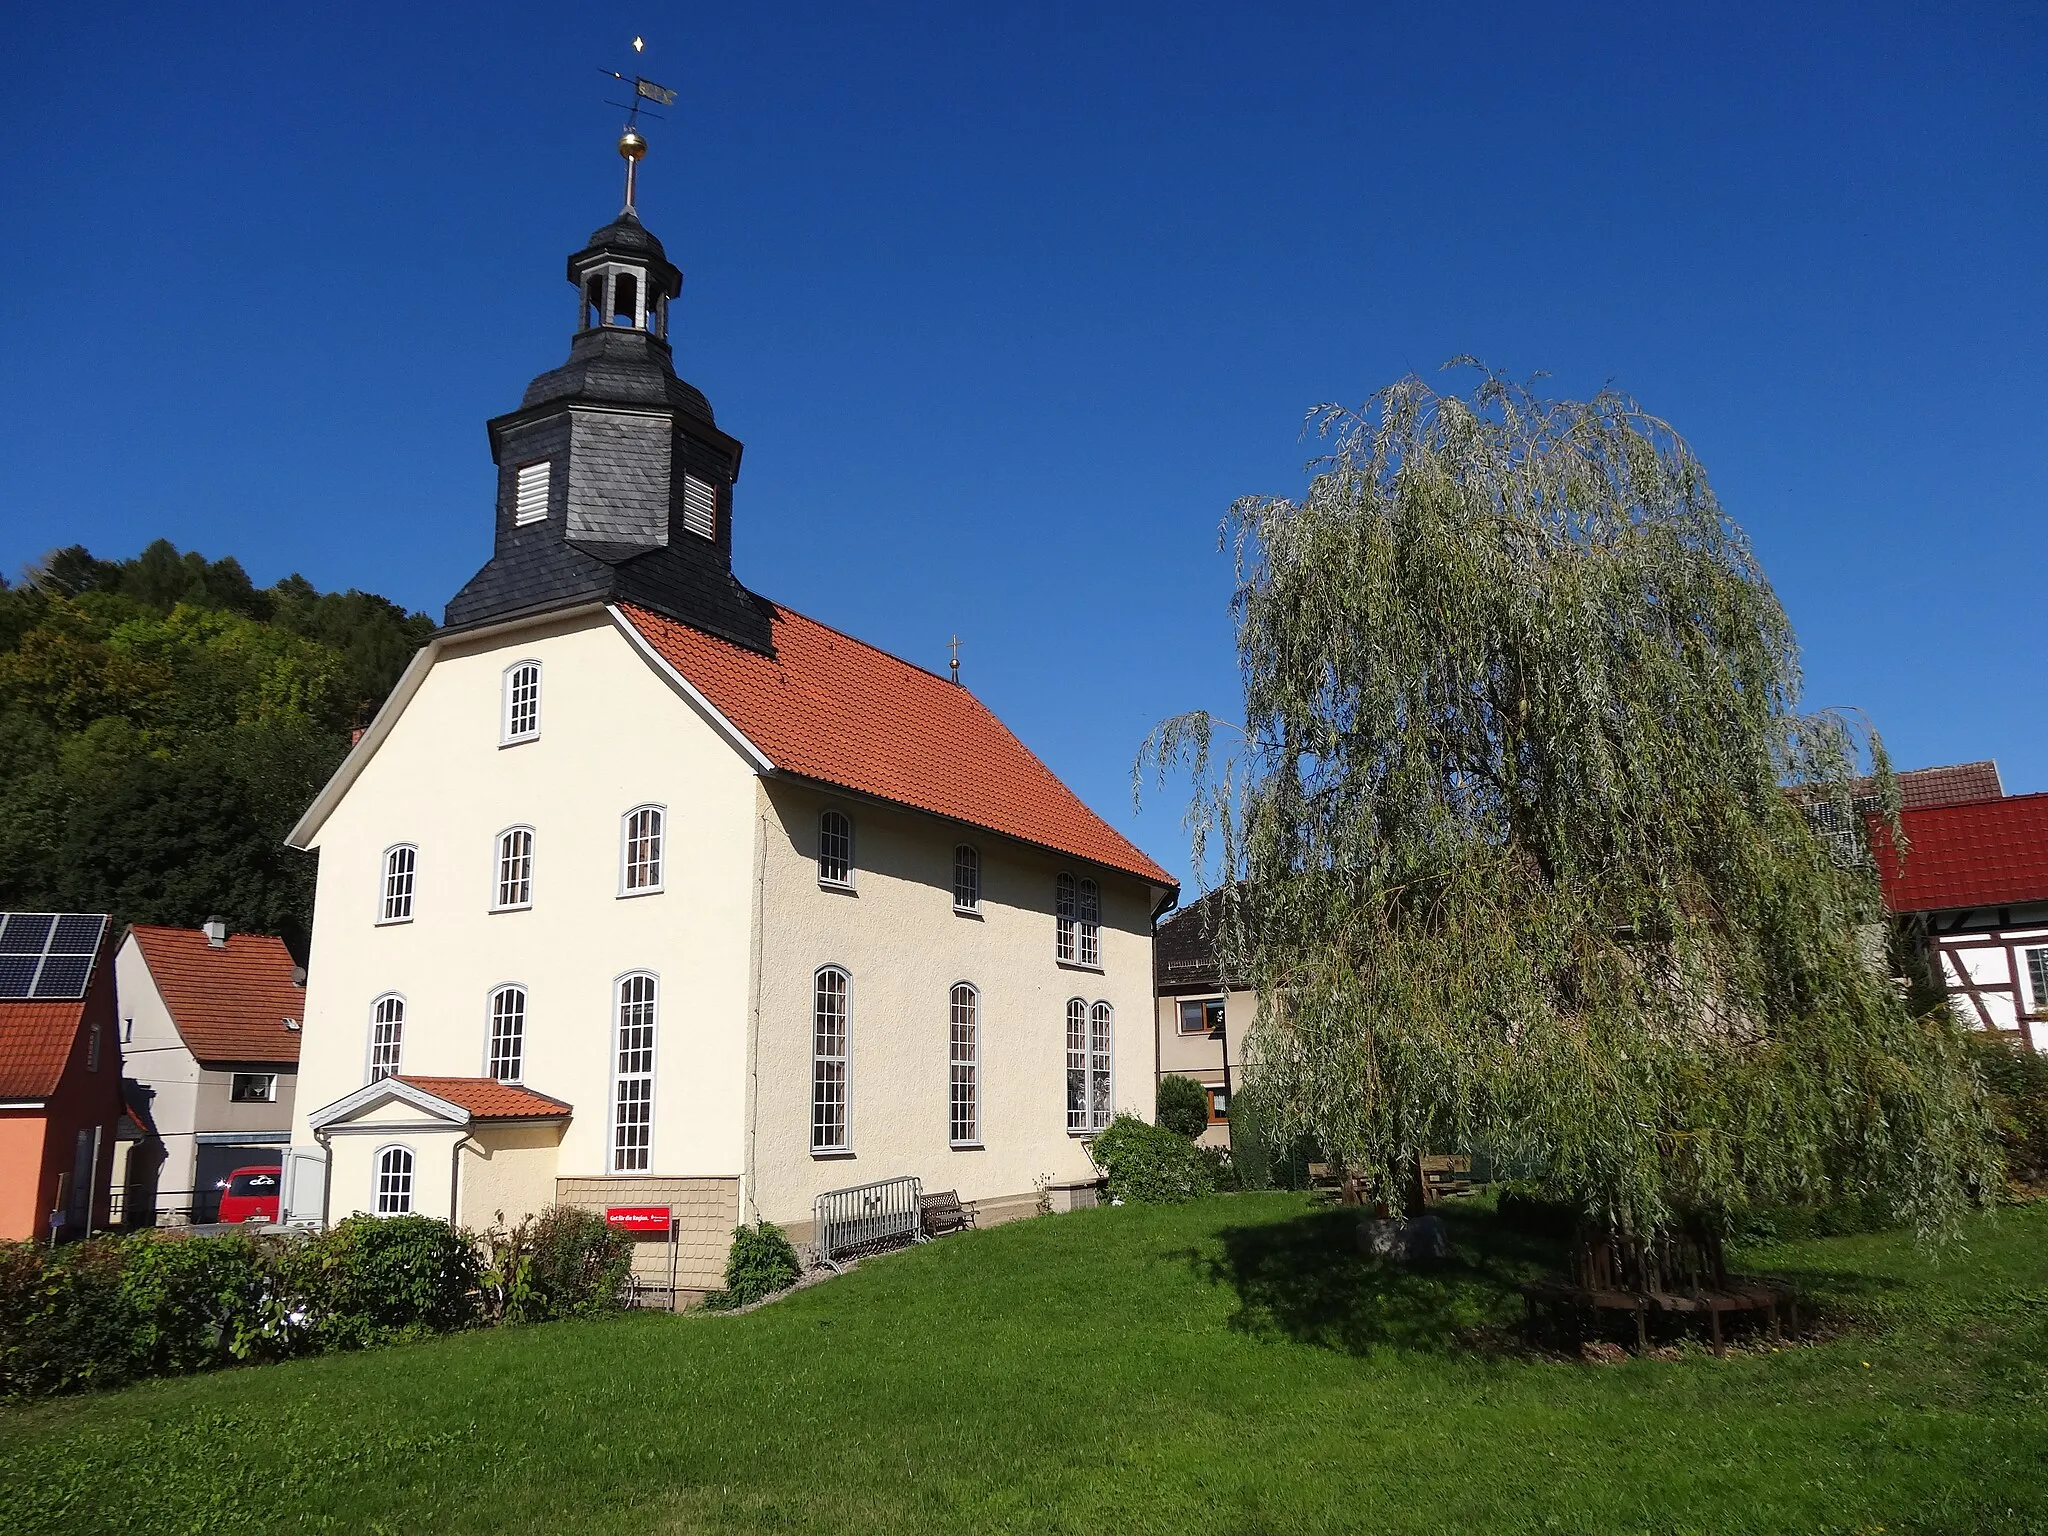 Photo showing: Church in Asbach (Schmalkalden), Thuringia, Germany